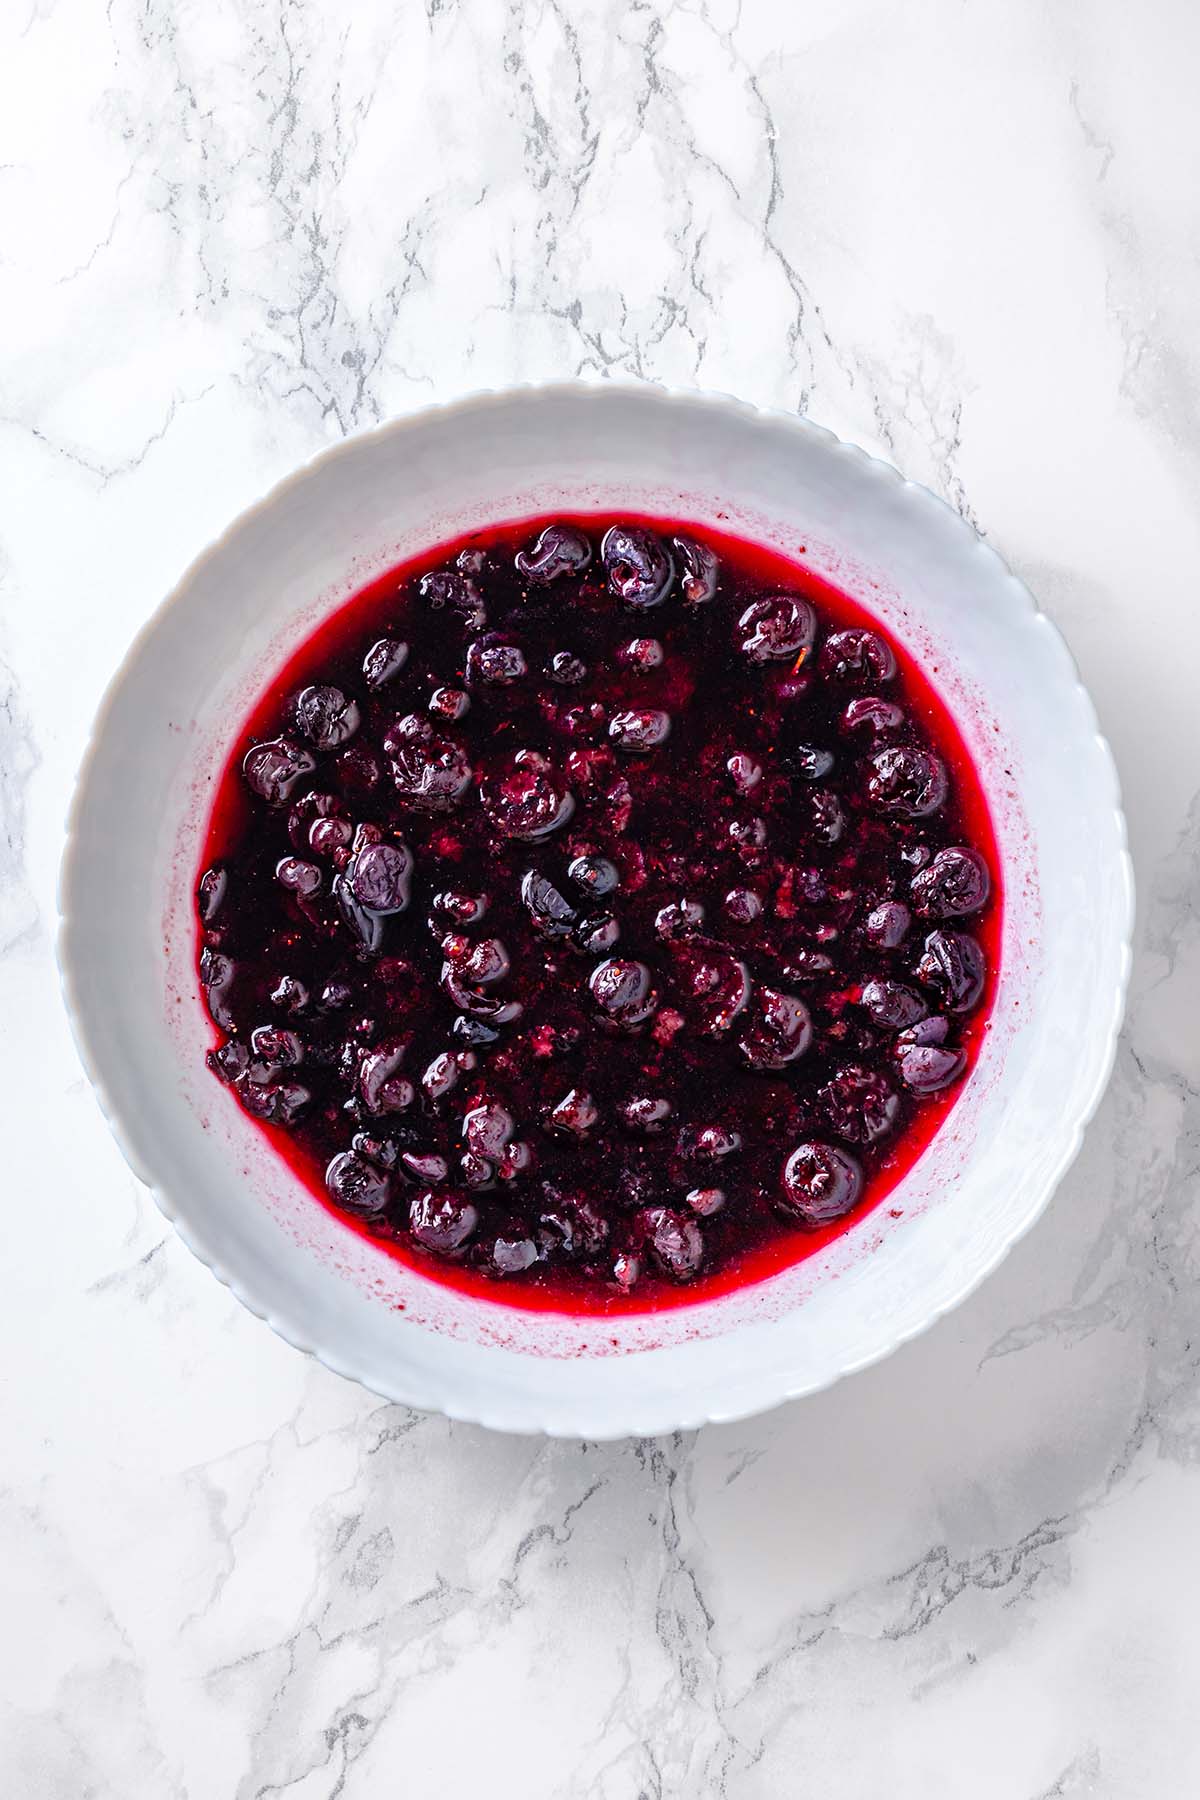 Mashed frozen blueberries in a bowl